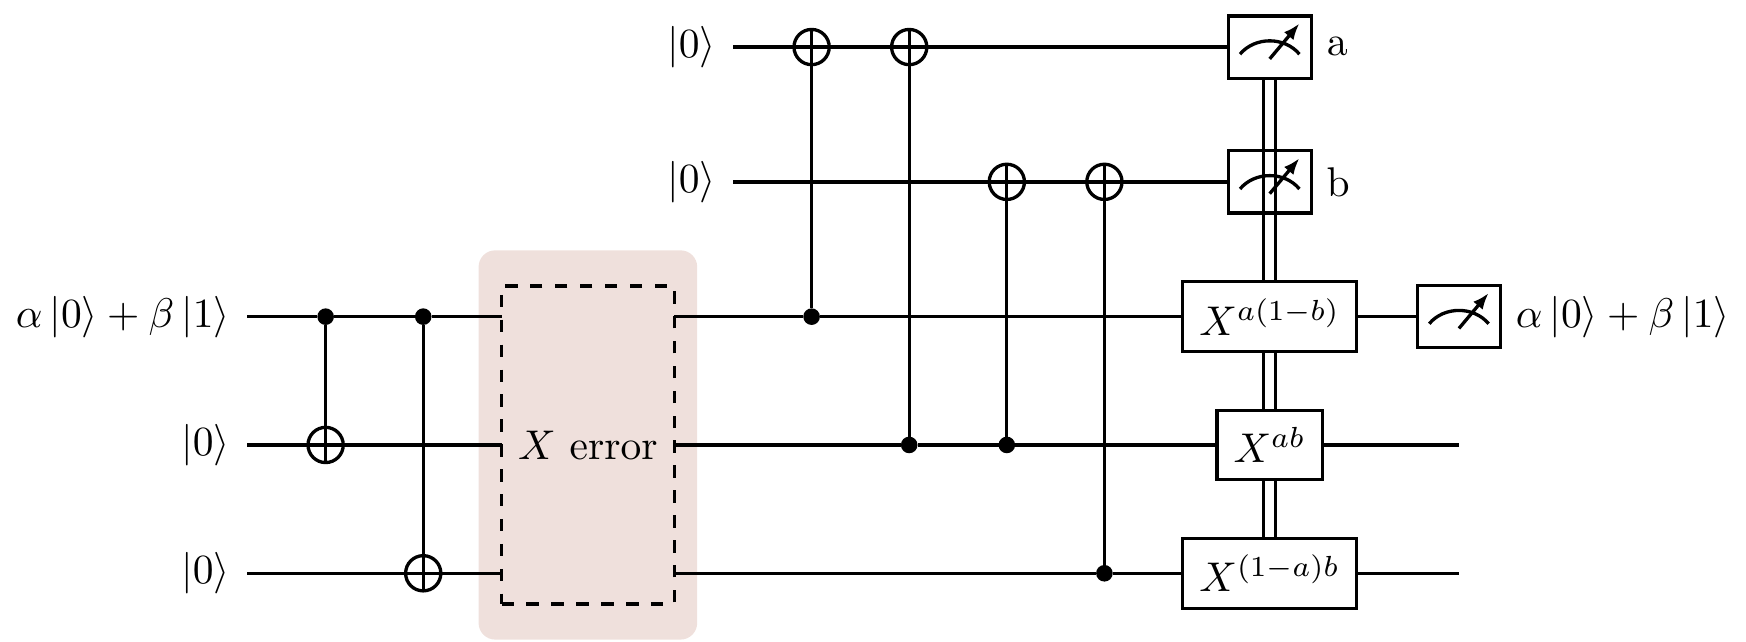 The quantised version of the classical [3,1,3]-code. If at most one bit-flip error occurs in the shaded region (which denotes the part where we transmit over a noisy channel), then this circuit perfectly corrects it, resulting in the successful transmission of the state \alpha|0\rangle+\beta|1\rangle.